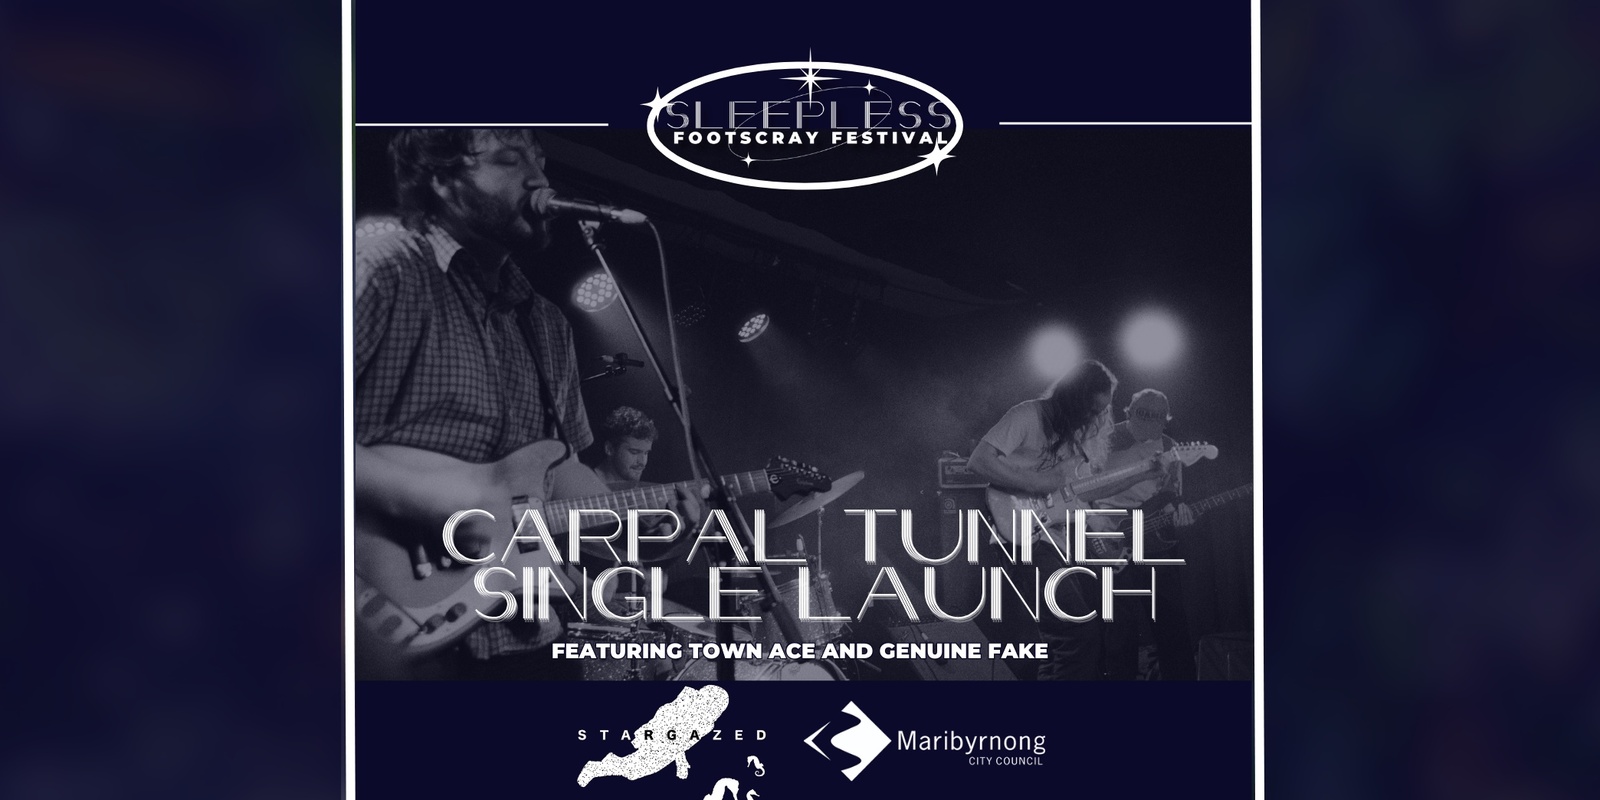 Banner image for Sleepless Footscray Festival: Carpal Tunnel Single Launch w/ Town Ace, Genuine Fake